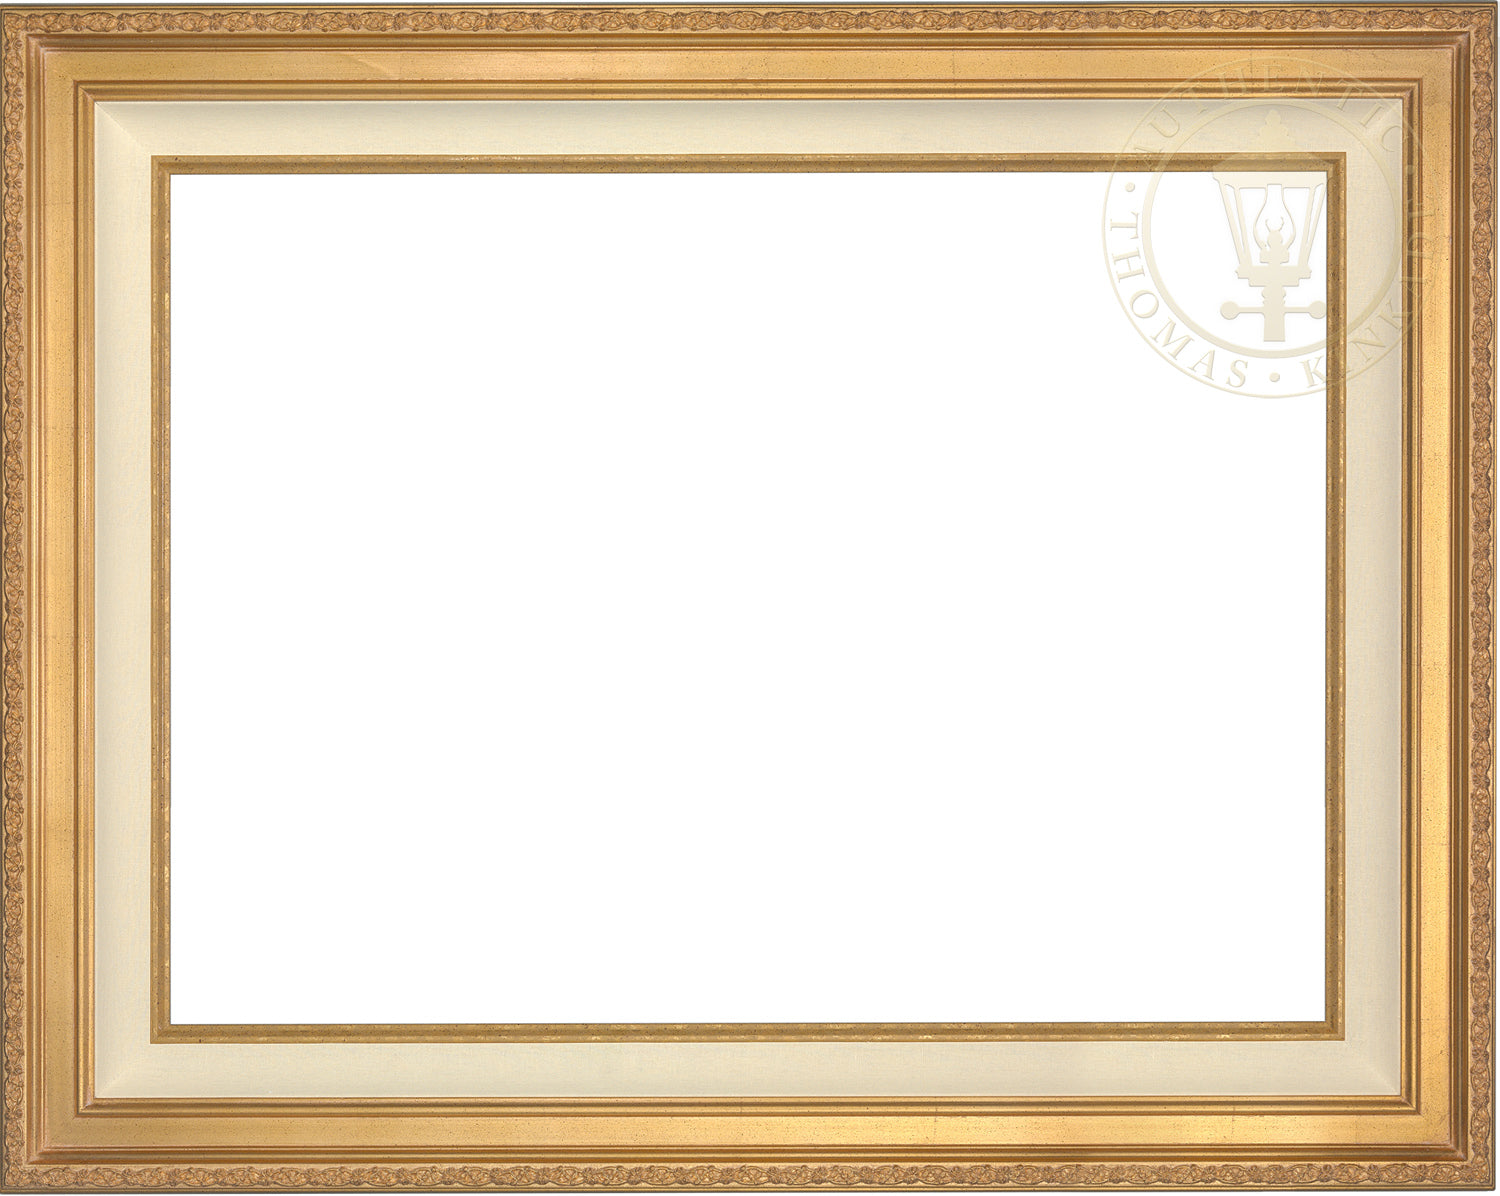 English Cod Still Life Print on Canvas in Wide Antiqued Gold Frame, 11x14  Print, 17x20 Framed